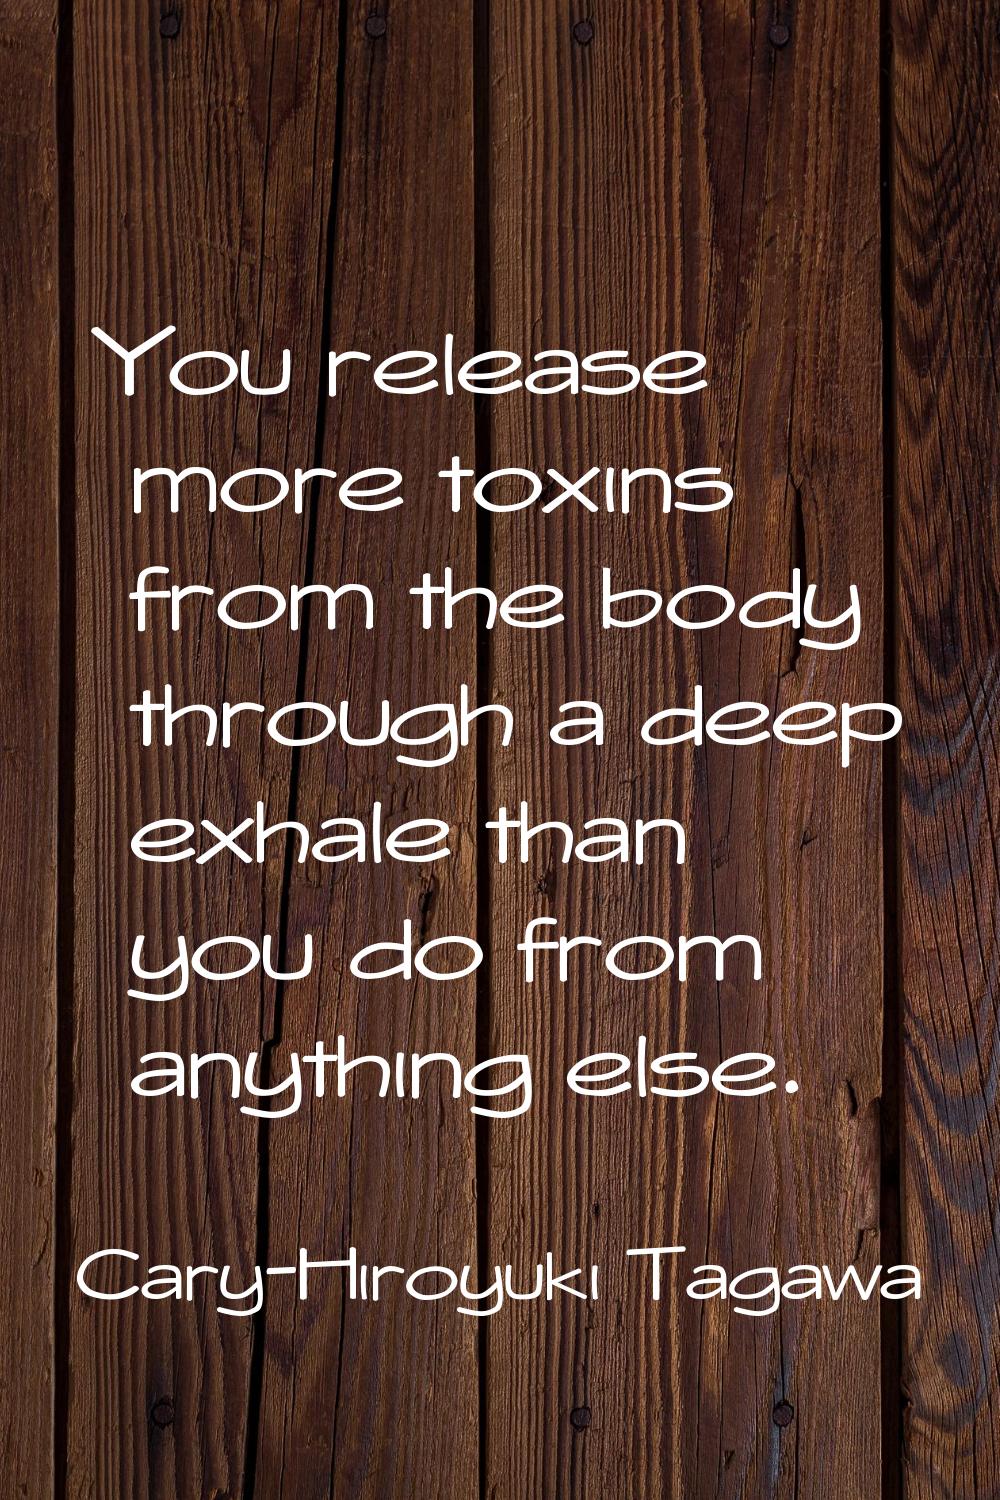 You release more toxins from the body through a deep exhale than you do from anything else.